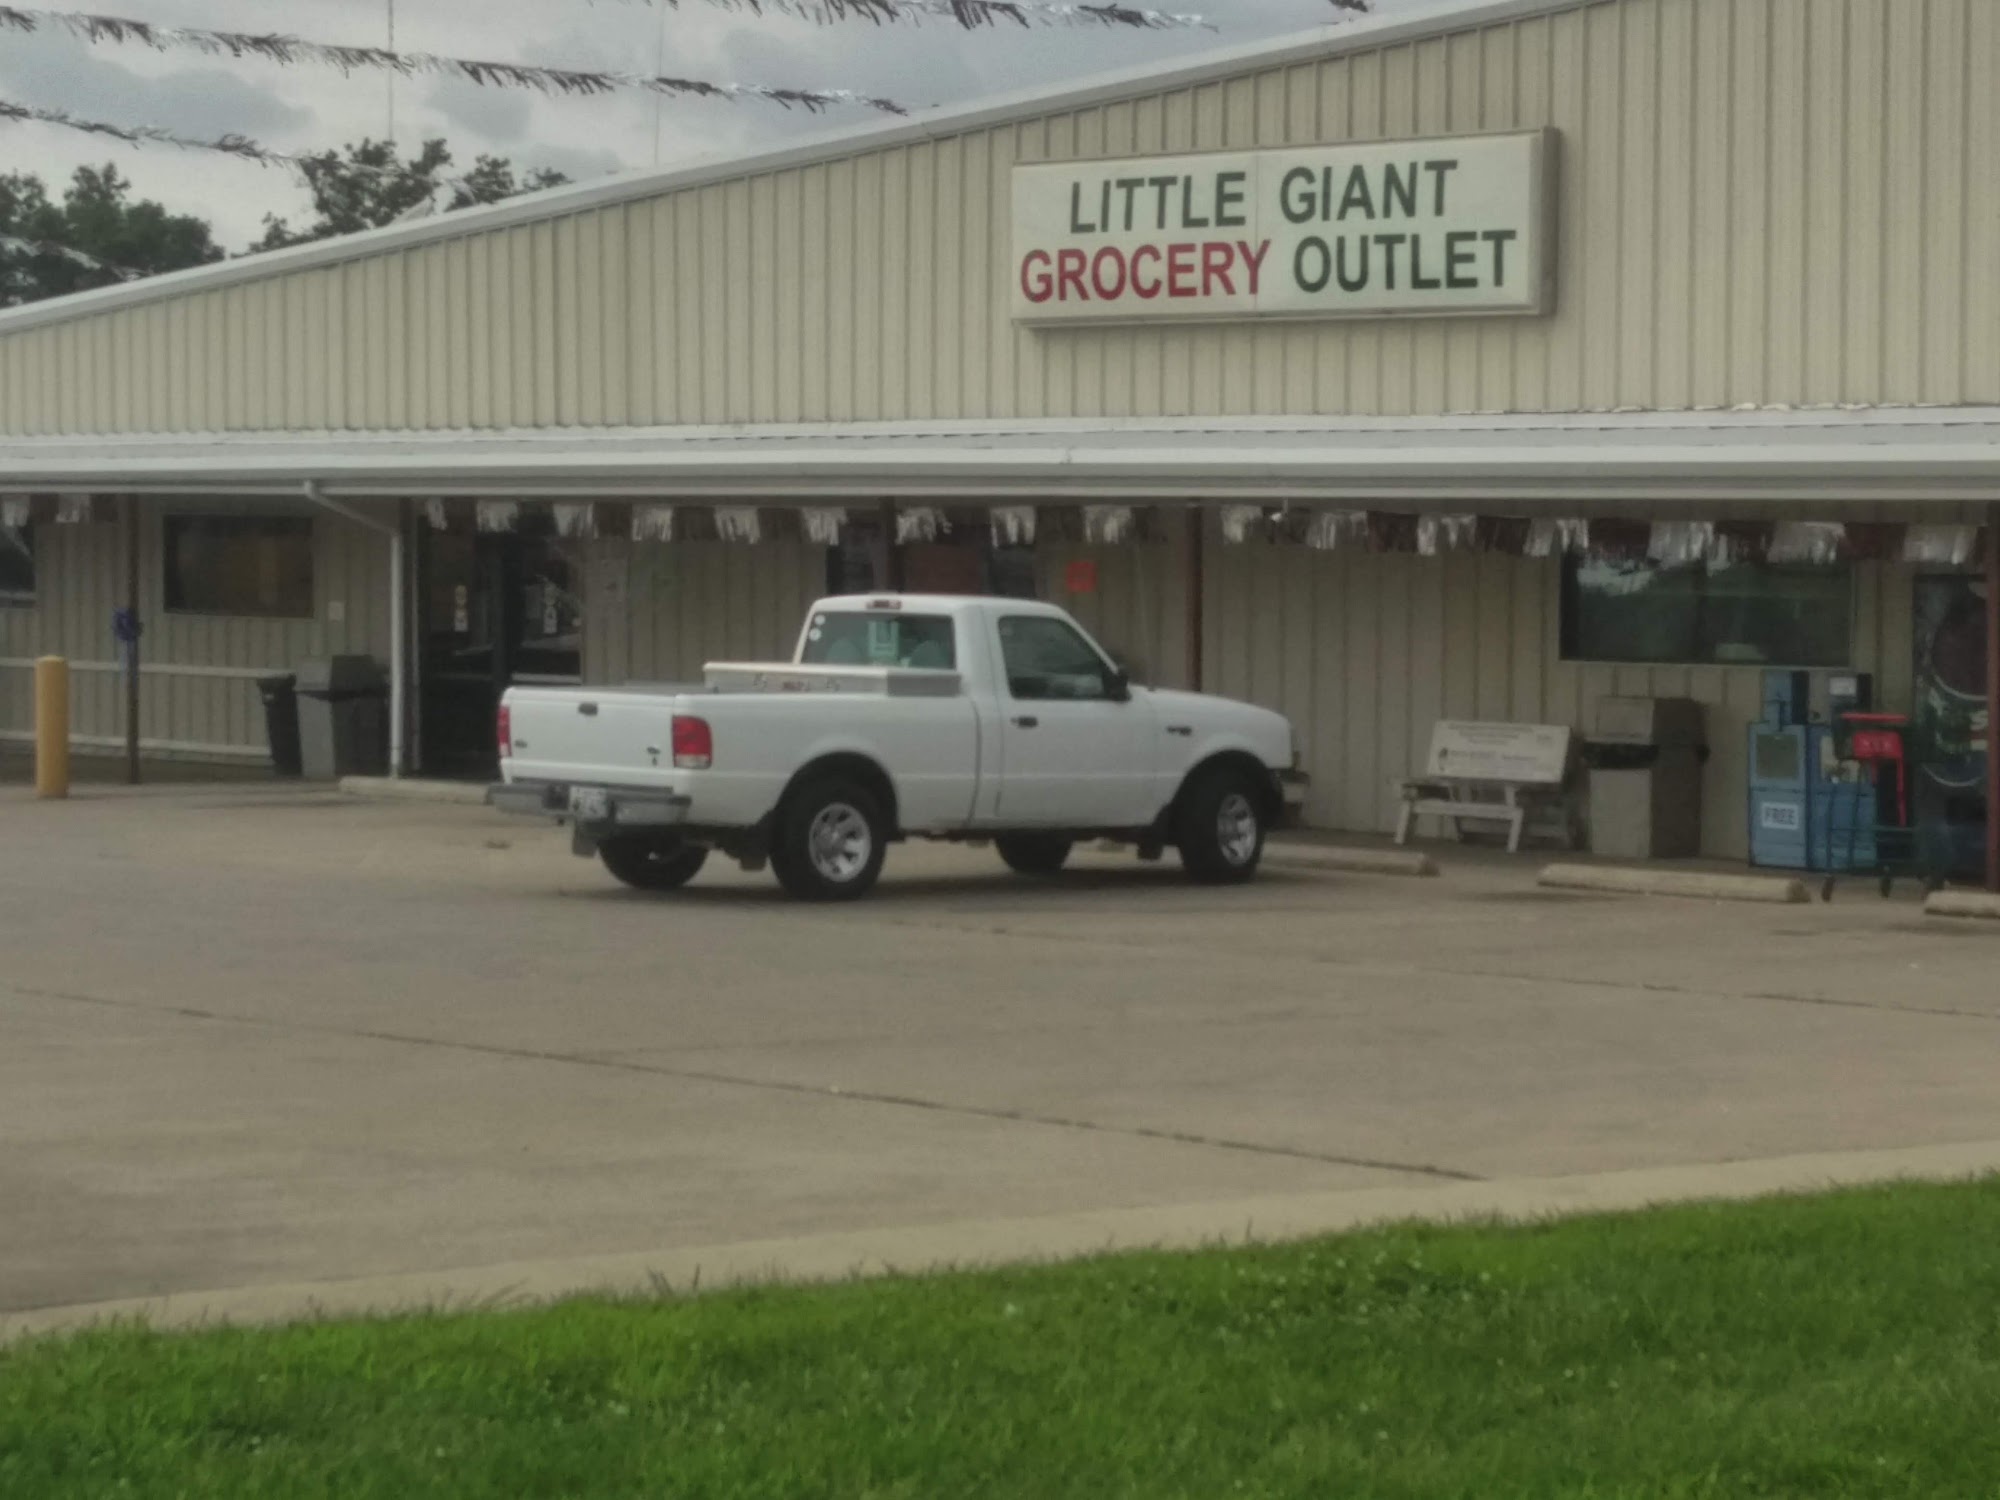 Little Giant Grocery